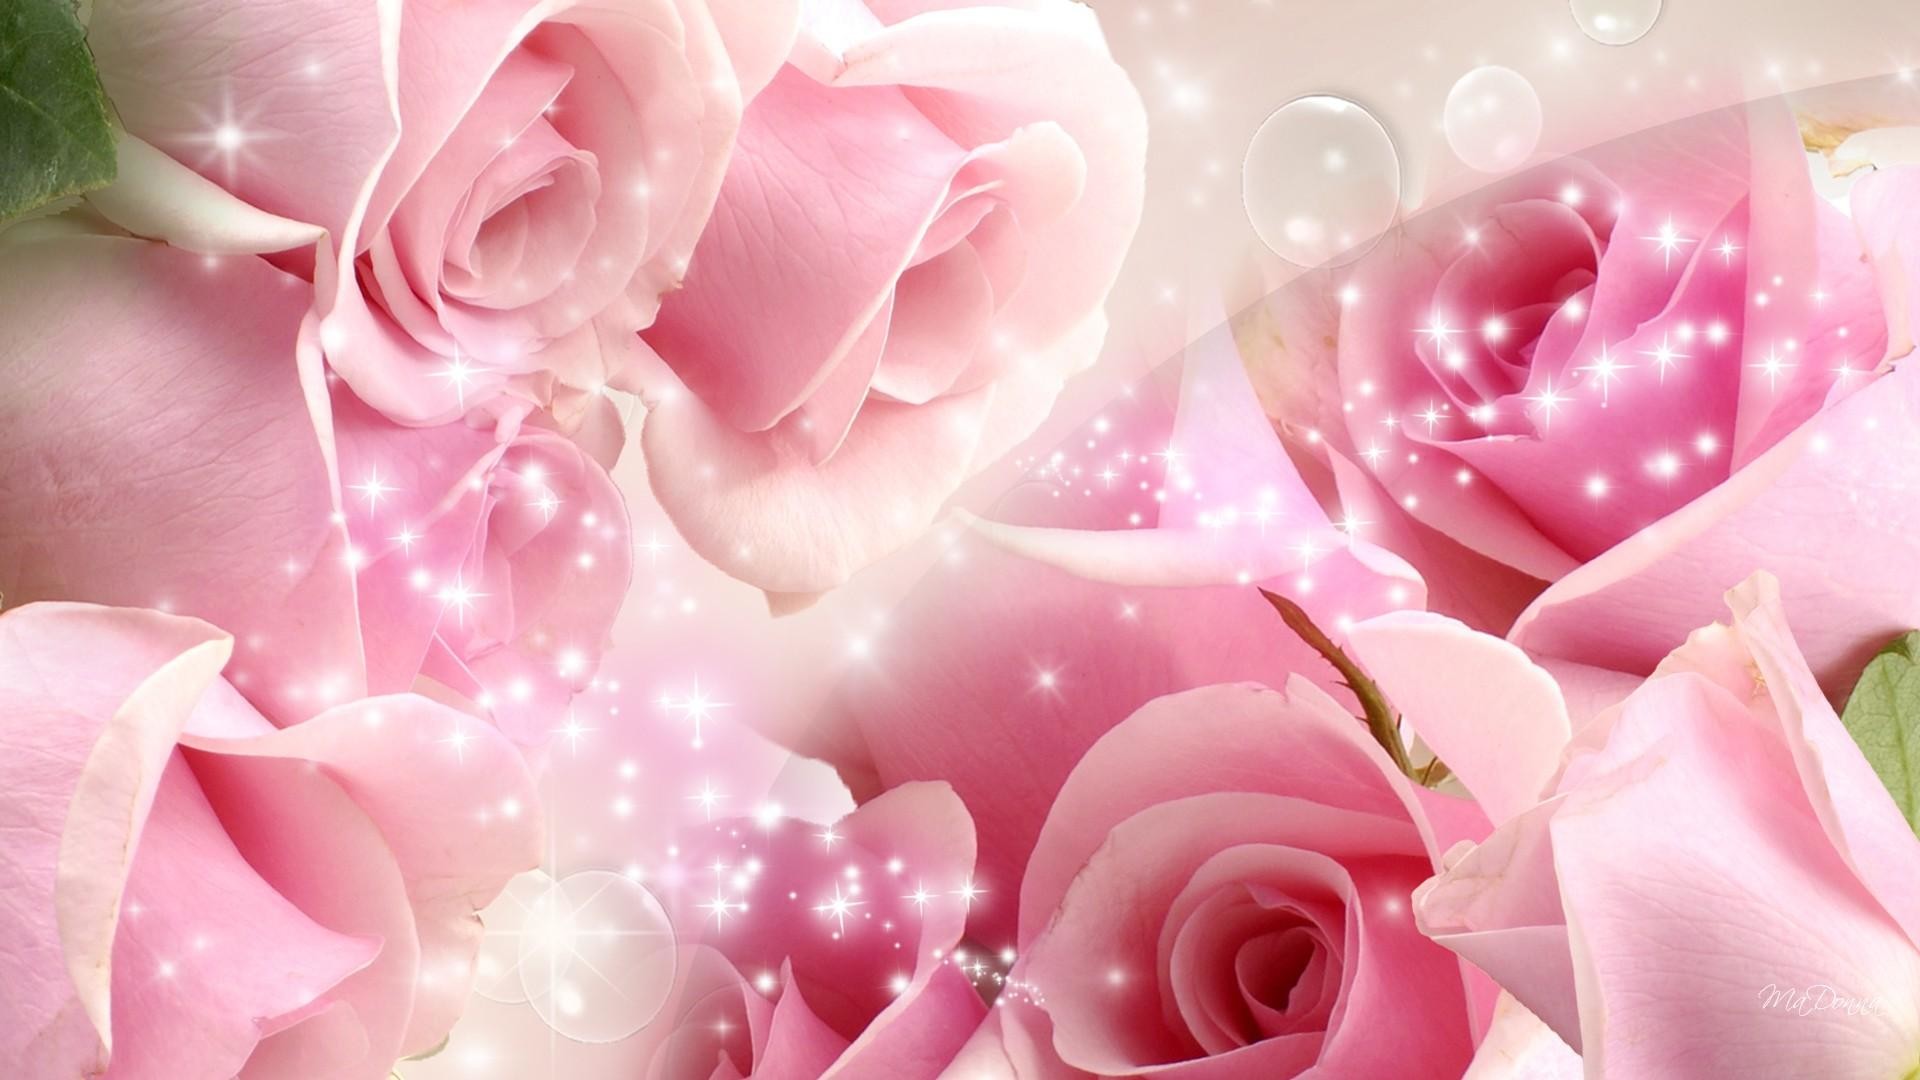 1920x1080 Rose so pink backgrounds download.